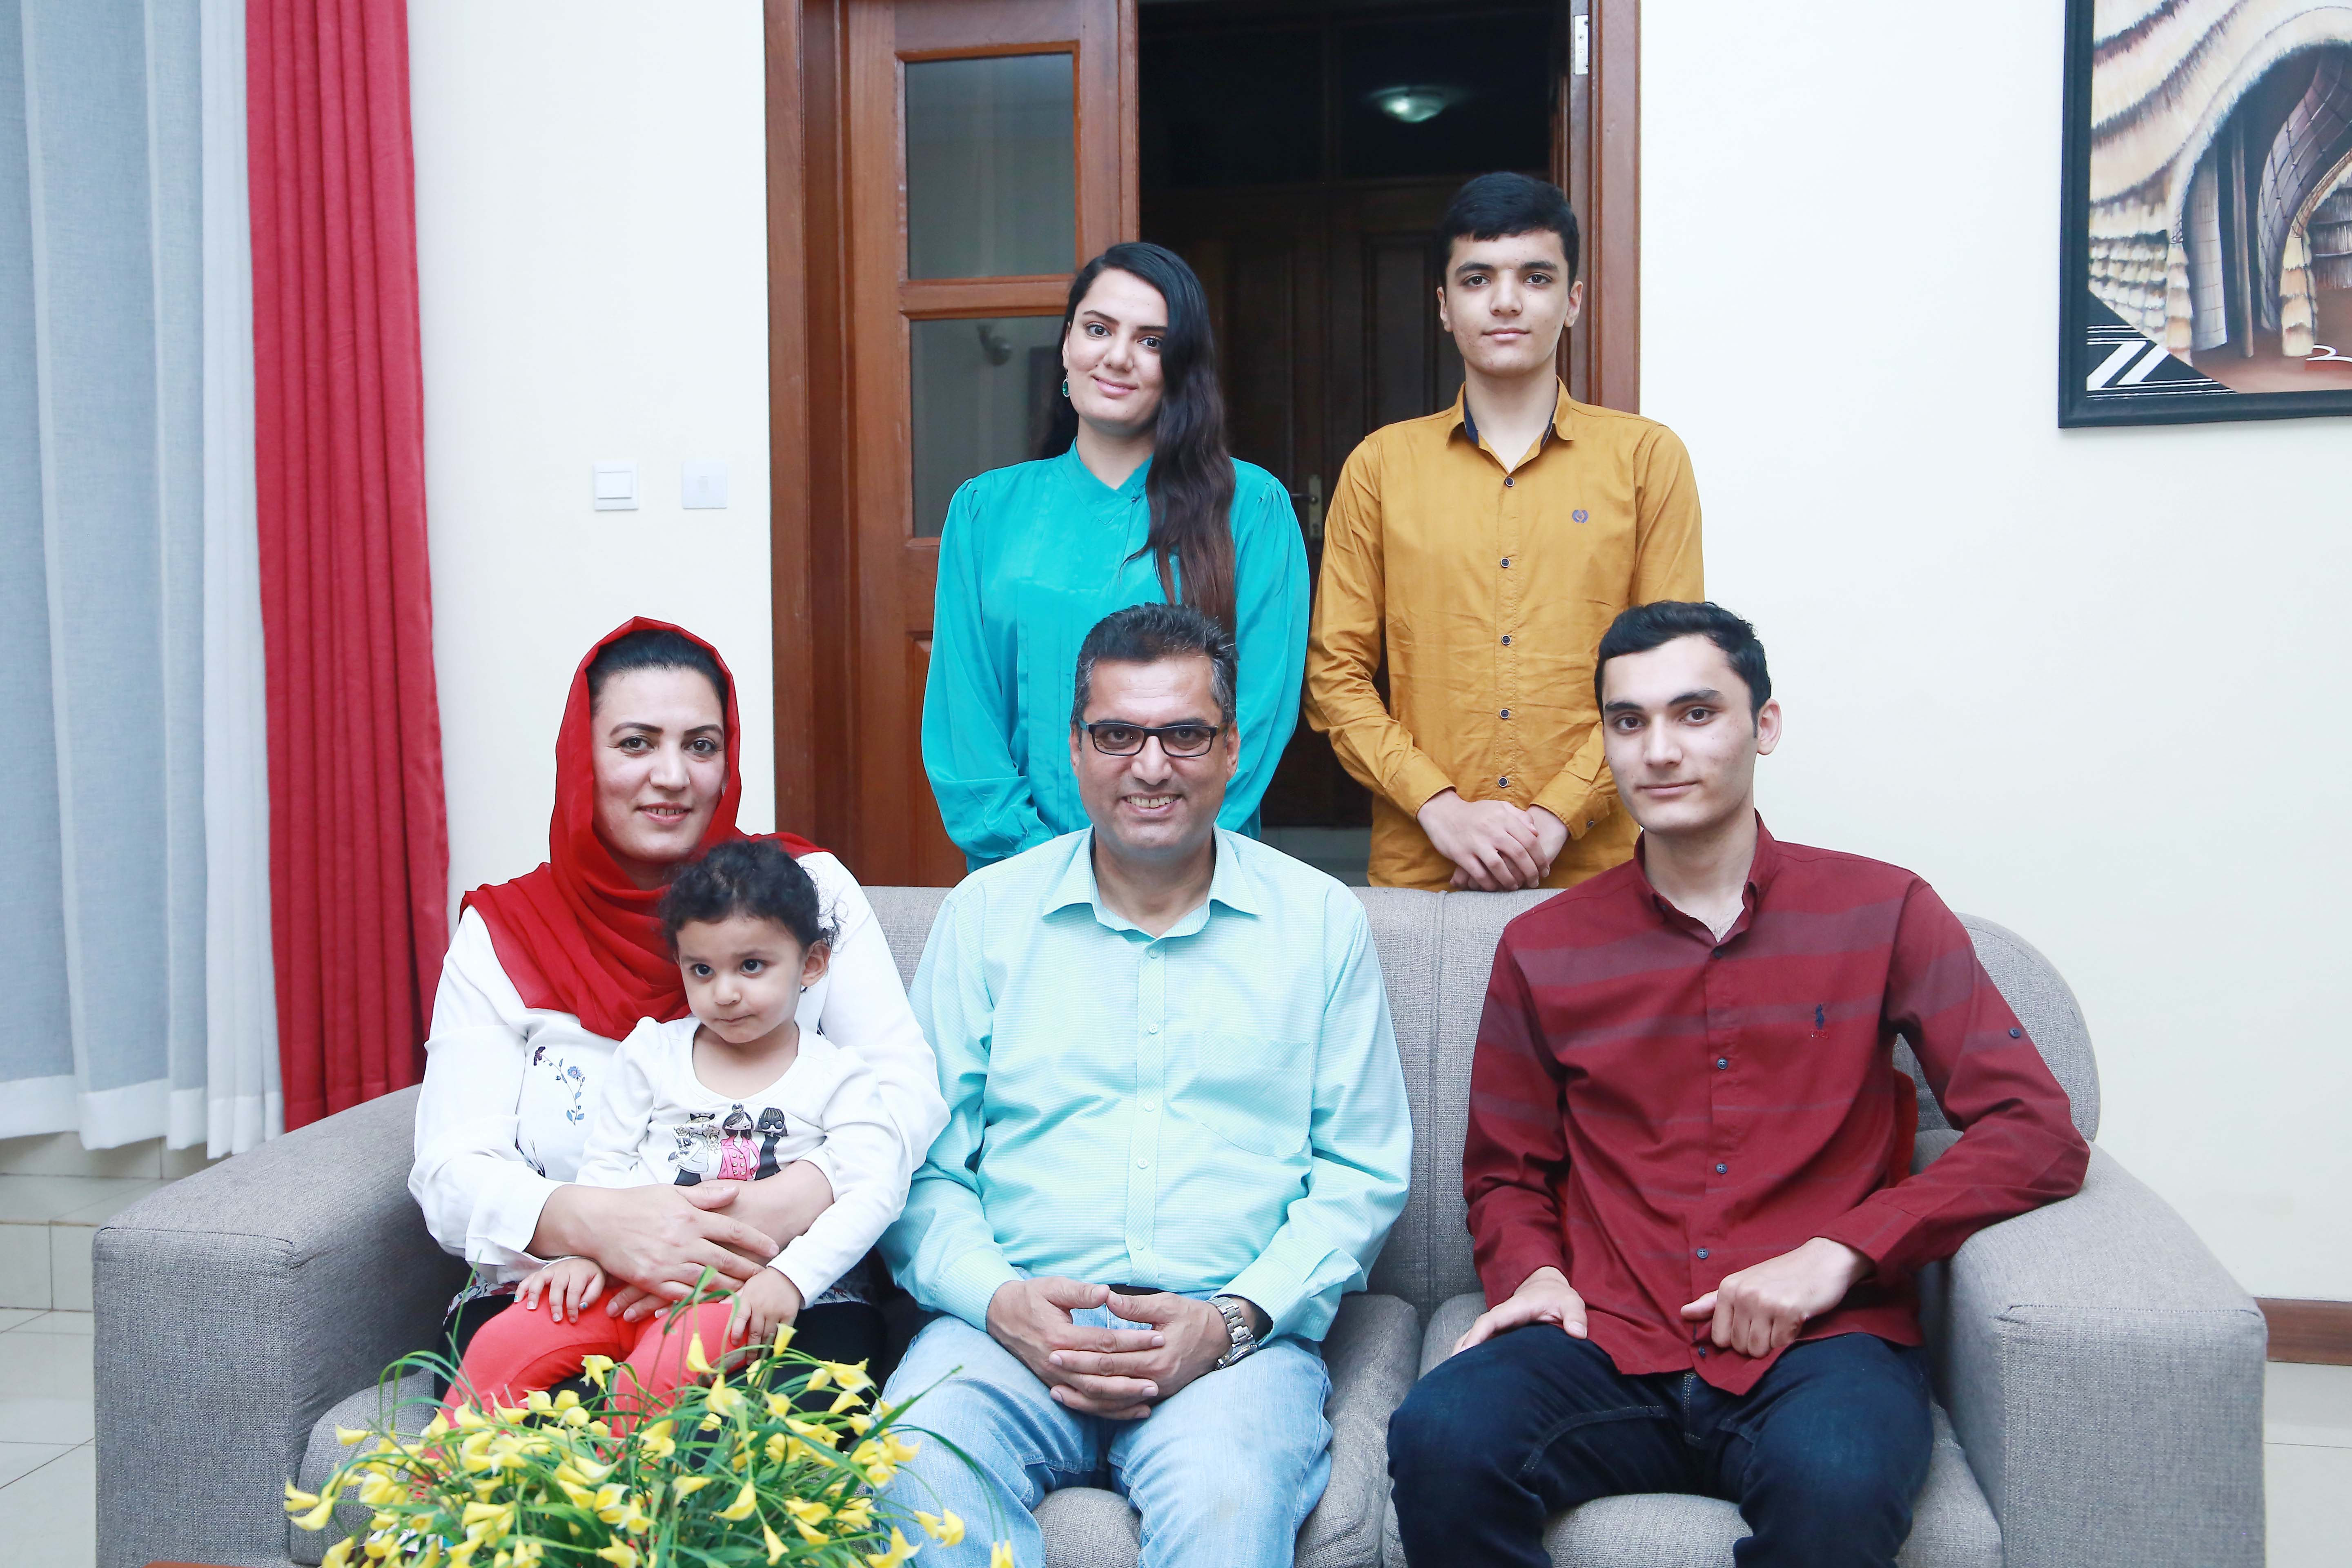 Dr Nesar Ahmed Hamraz (seated, centre) with his wife, Dr Melinda Hamraz, and their children pose for a family photo after an interview in Kigali on May 9. Sam Ngendahimana.